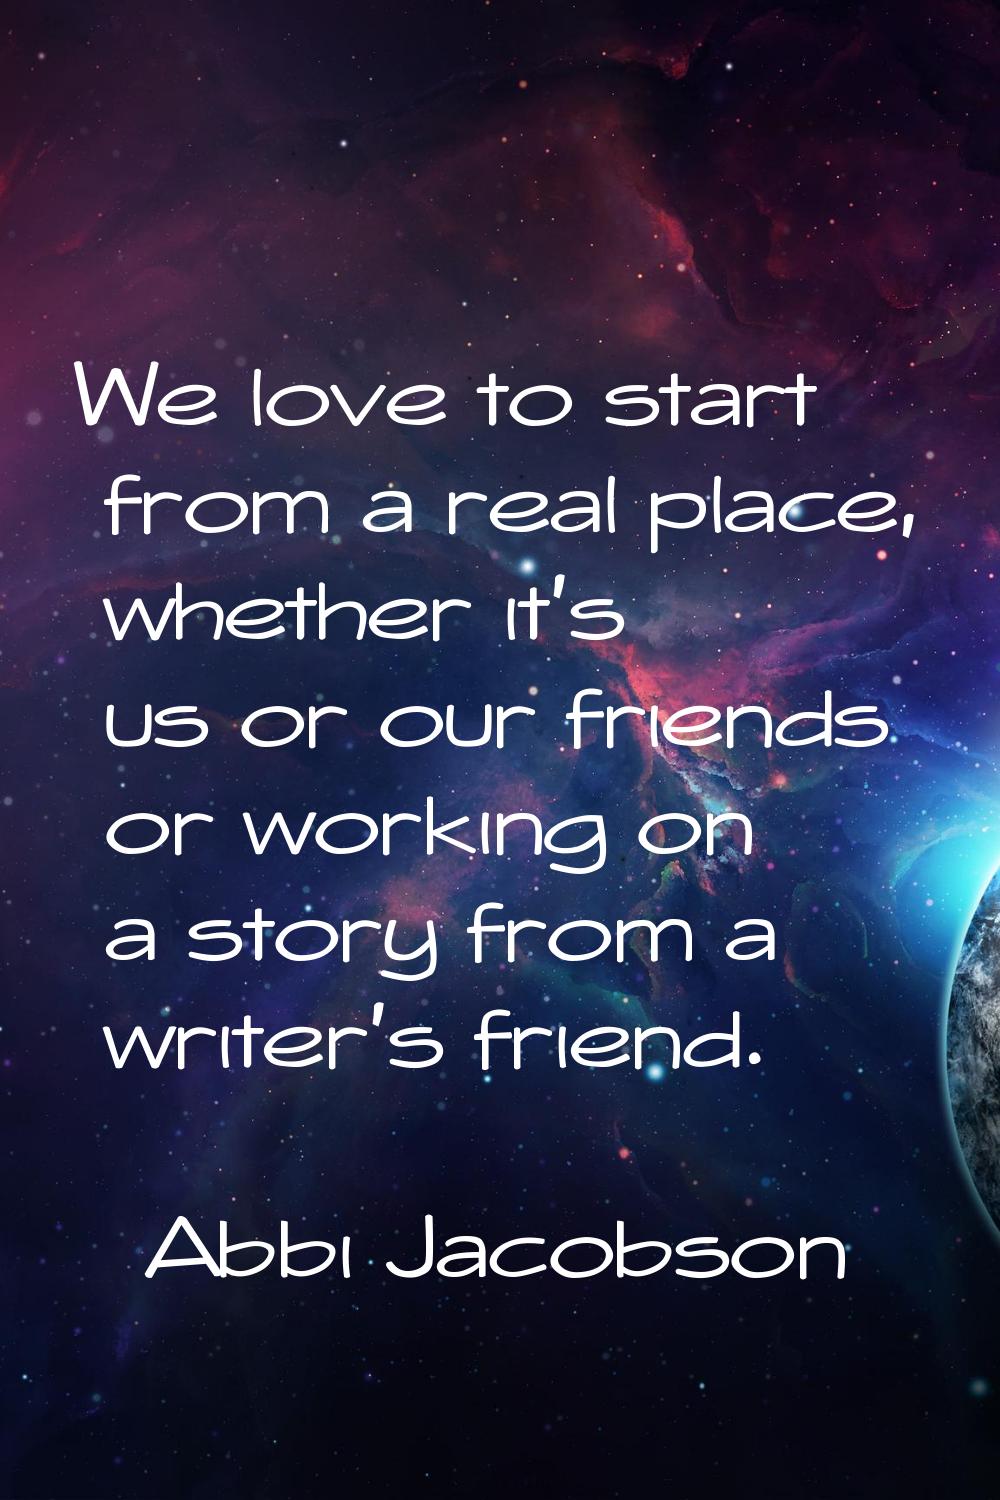 We love to start from a real place, whether it's us or our friends or working on a story from a wri